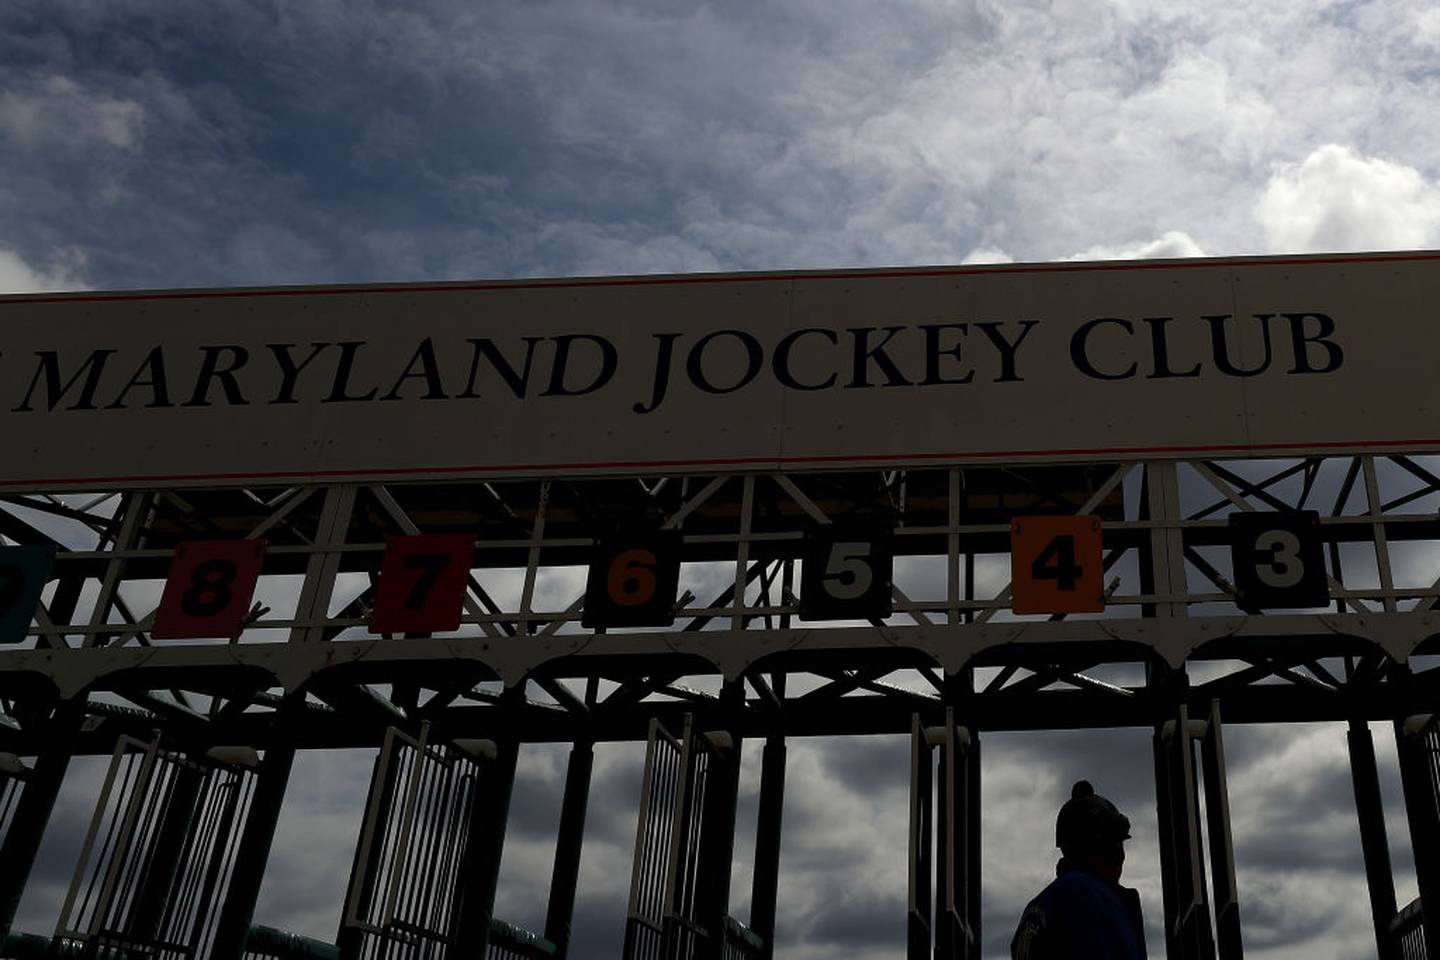 LAUREL, MARYLAND - MARCH 15: A man walks in front of a starting gate as horses and jockeys prepare to race without spectators at Laurel Park on March 15, 2020 in Laurel, Maryland. Nearly all of professional sports have been canceled or postposed because of the Coronavirus pandemic, except for horse racing. However, today Maryland Gov. Larry Hogan issued an emergency order to close all Maryland casinos, racetracks, and simulcast betting facilities to the general public due to COVID-19.